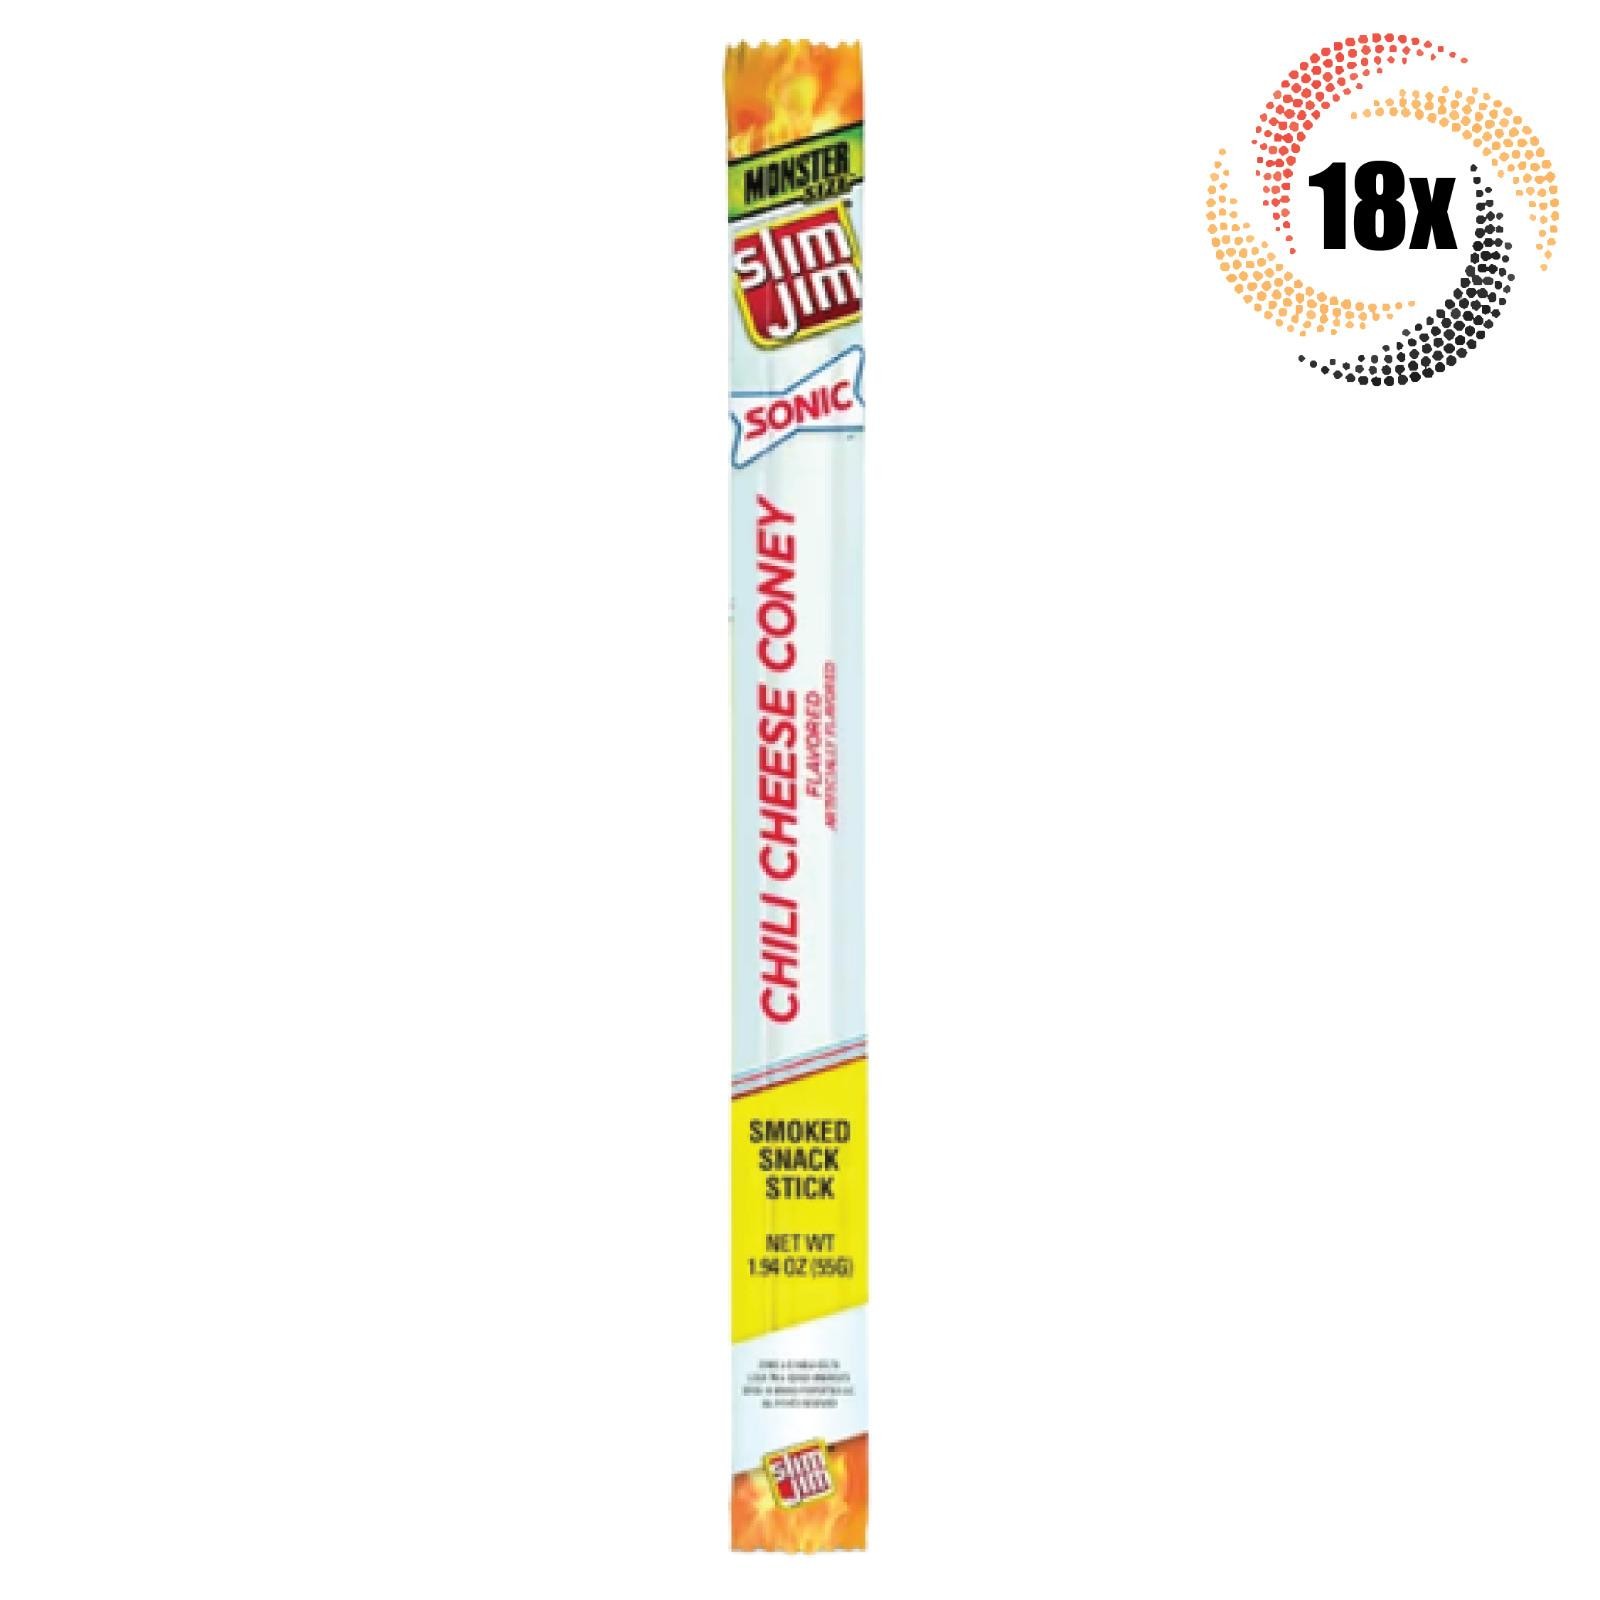 Slim Jim Monster Sonic Chili Cheese Coney Flavor Meat Stick  1.94 Oz